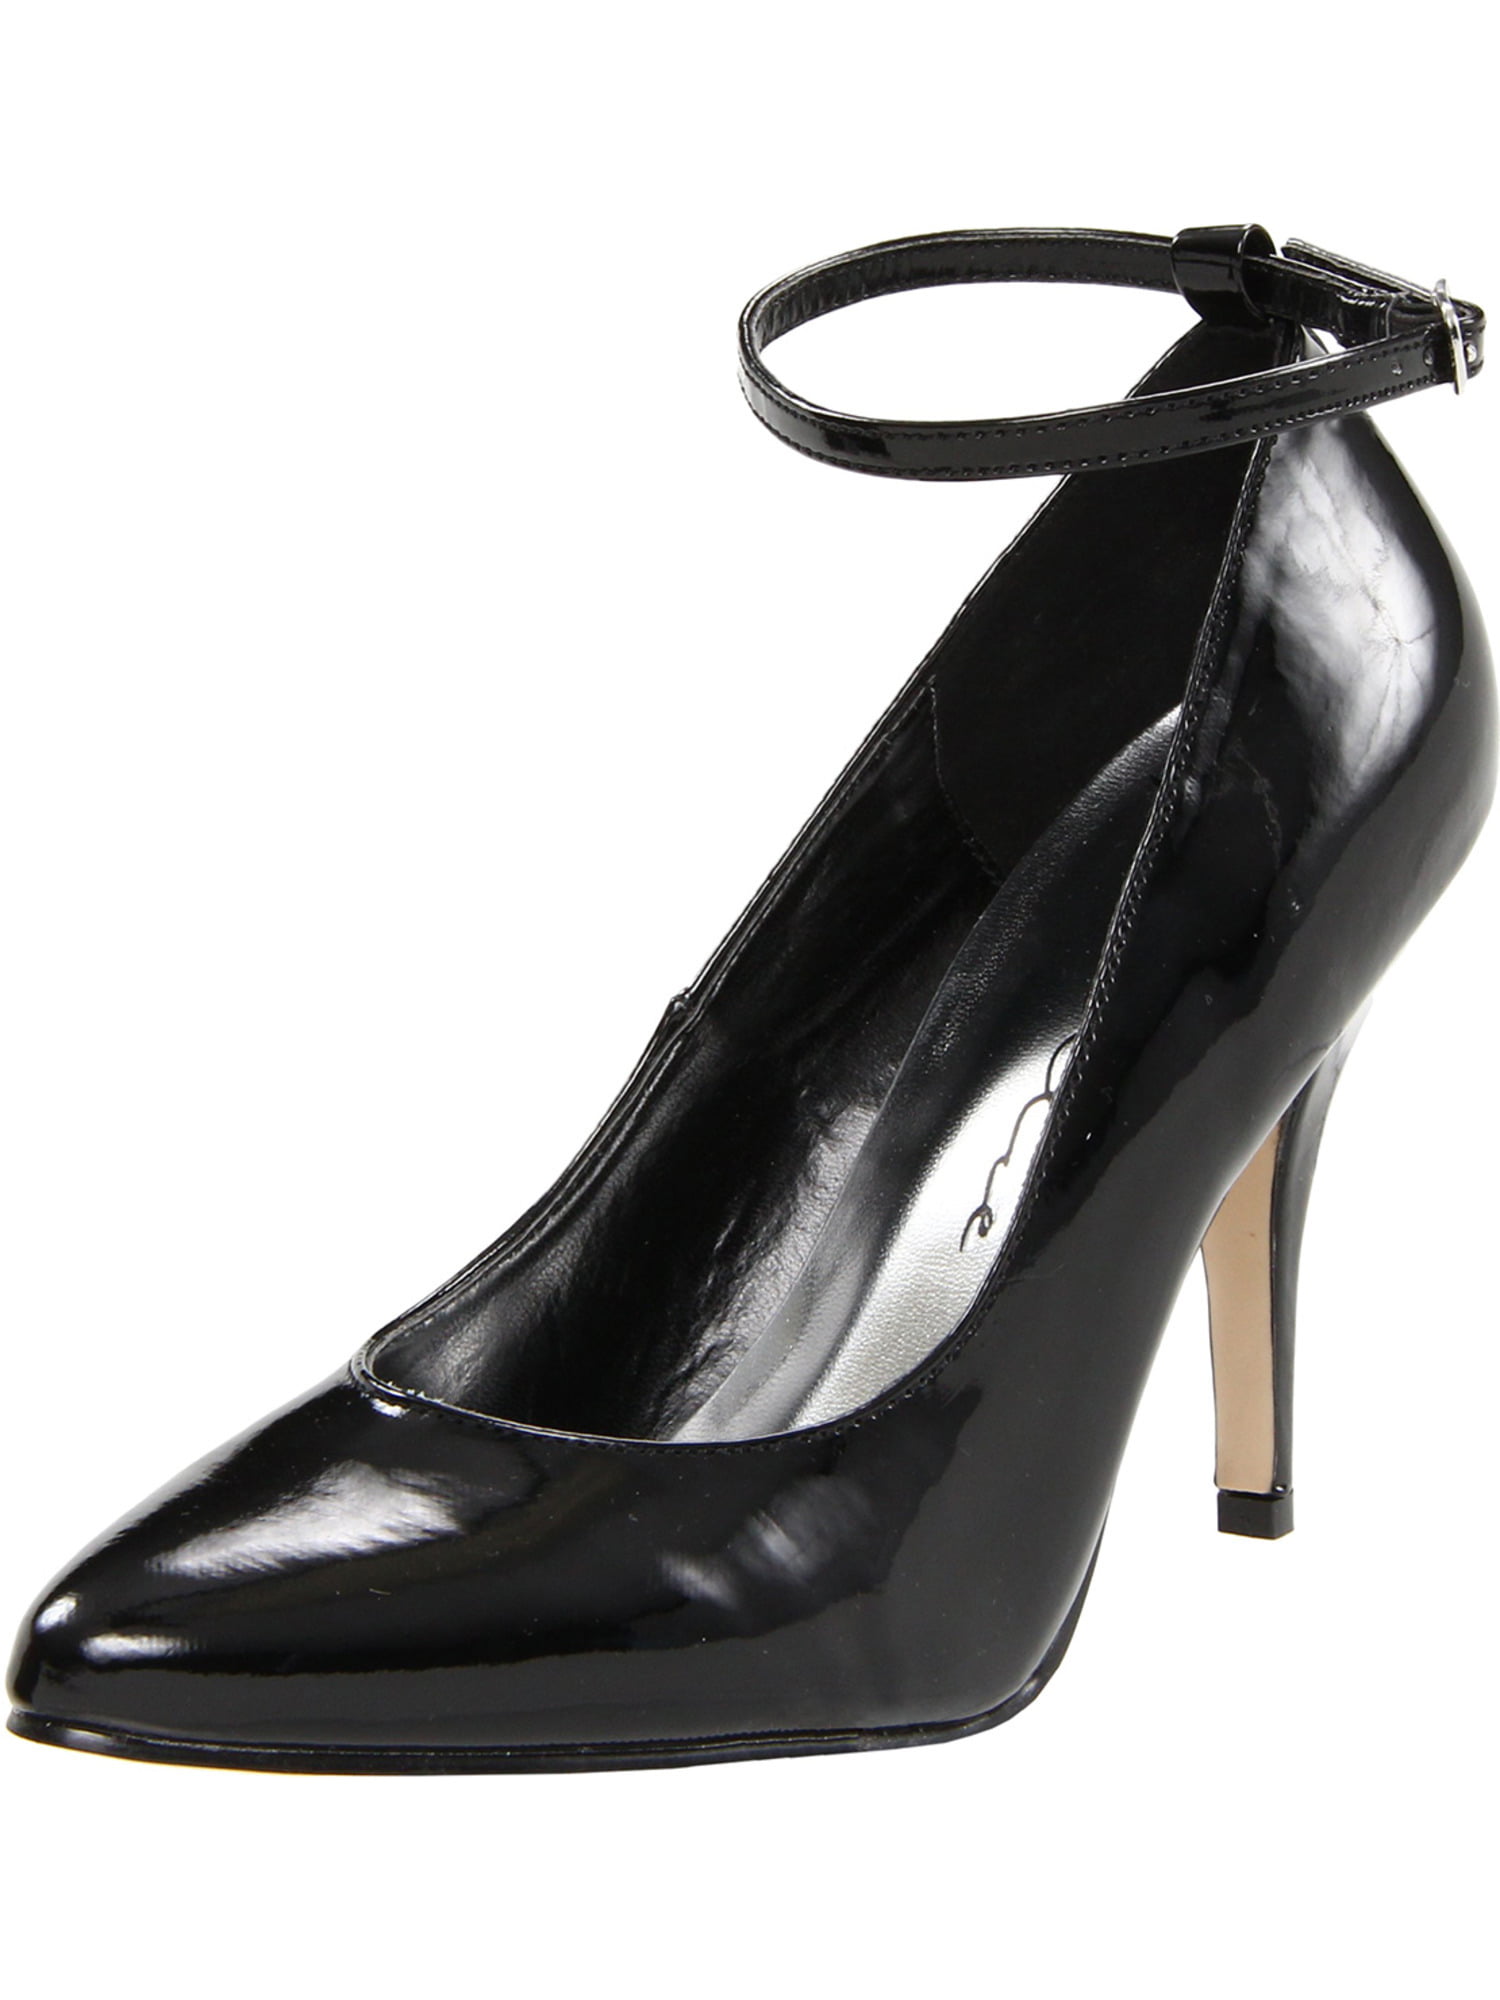 Womens Pointed Toe Pumps Black 